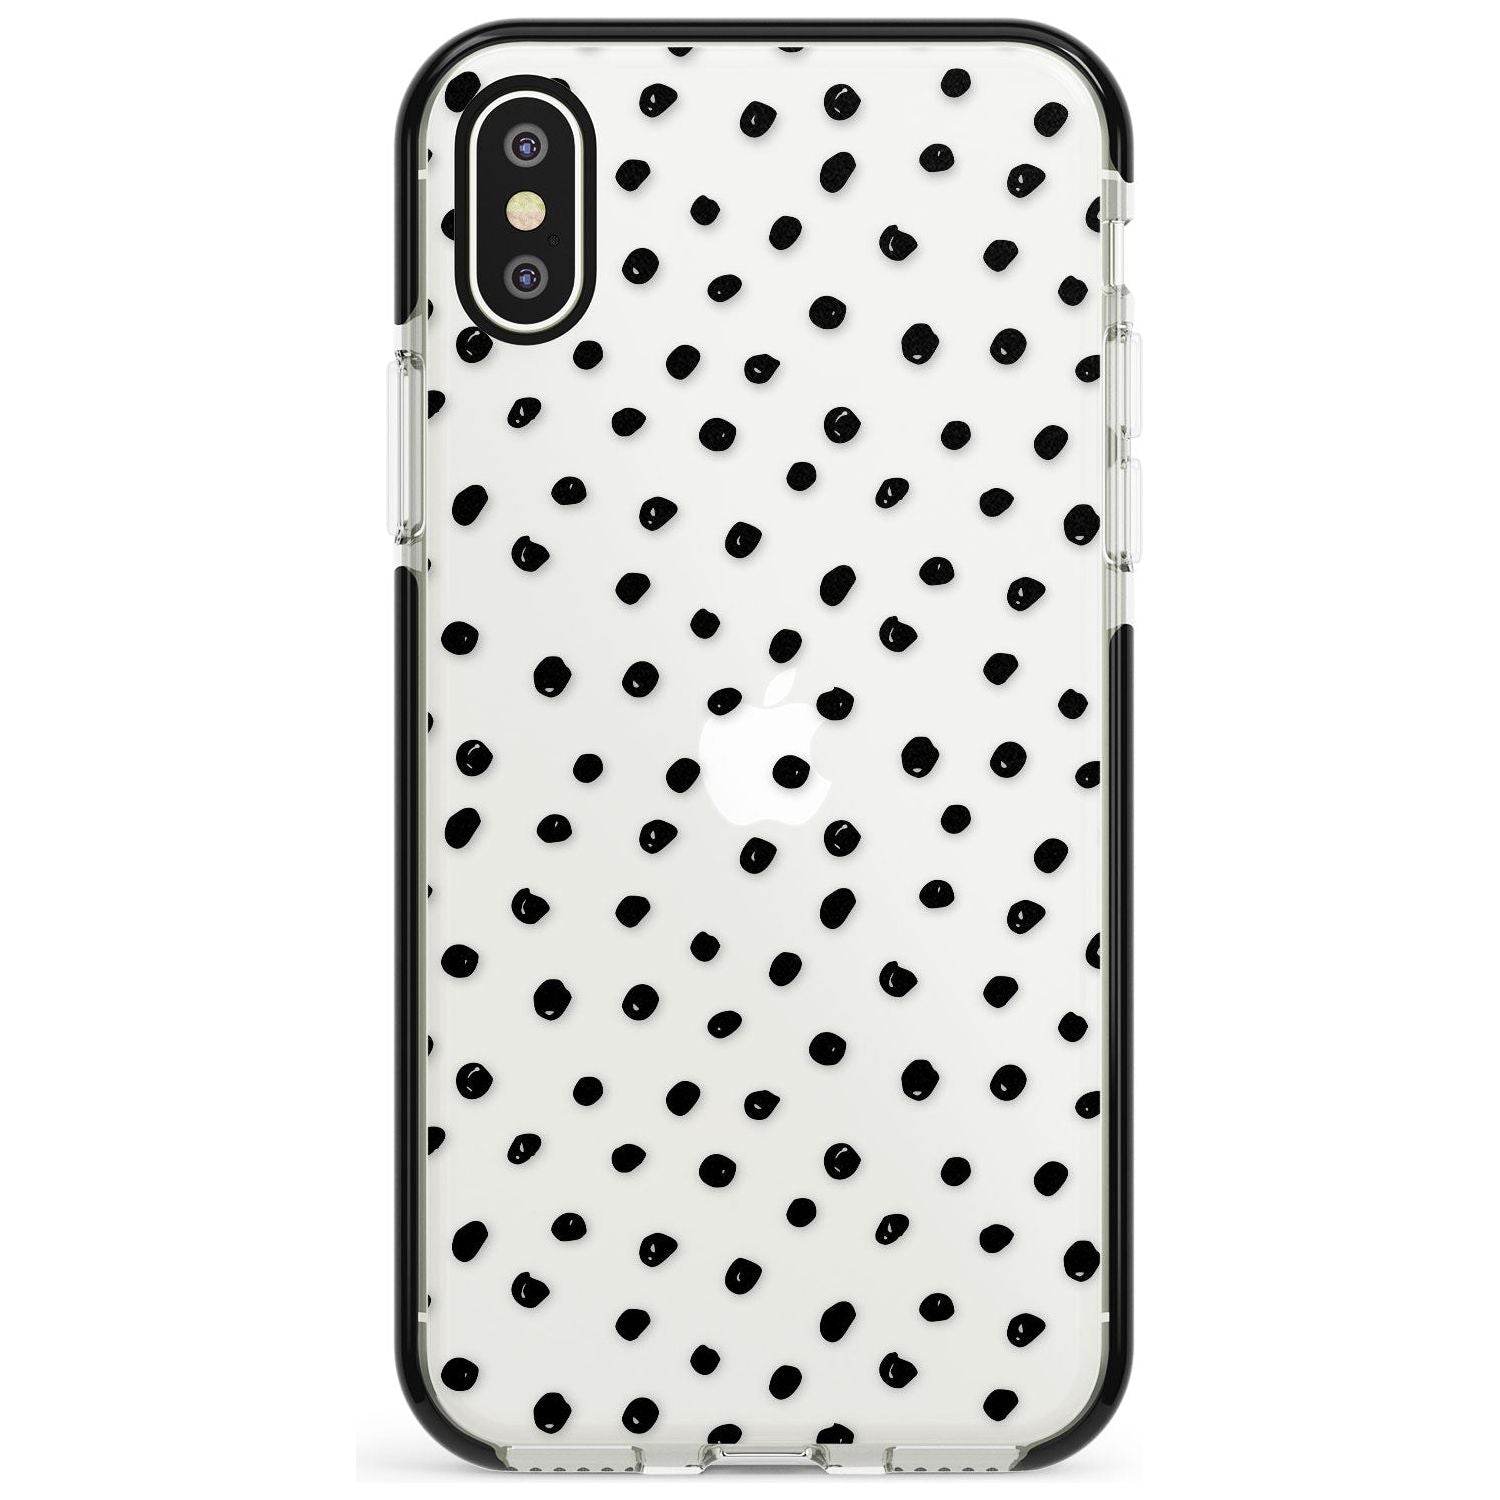 Messy Black Dot Pattern Pink Fade Impact Phone Case for iPhone X XS Max XR